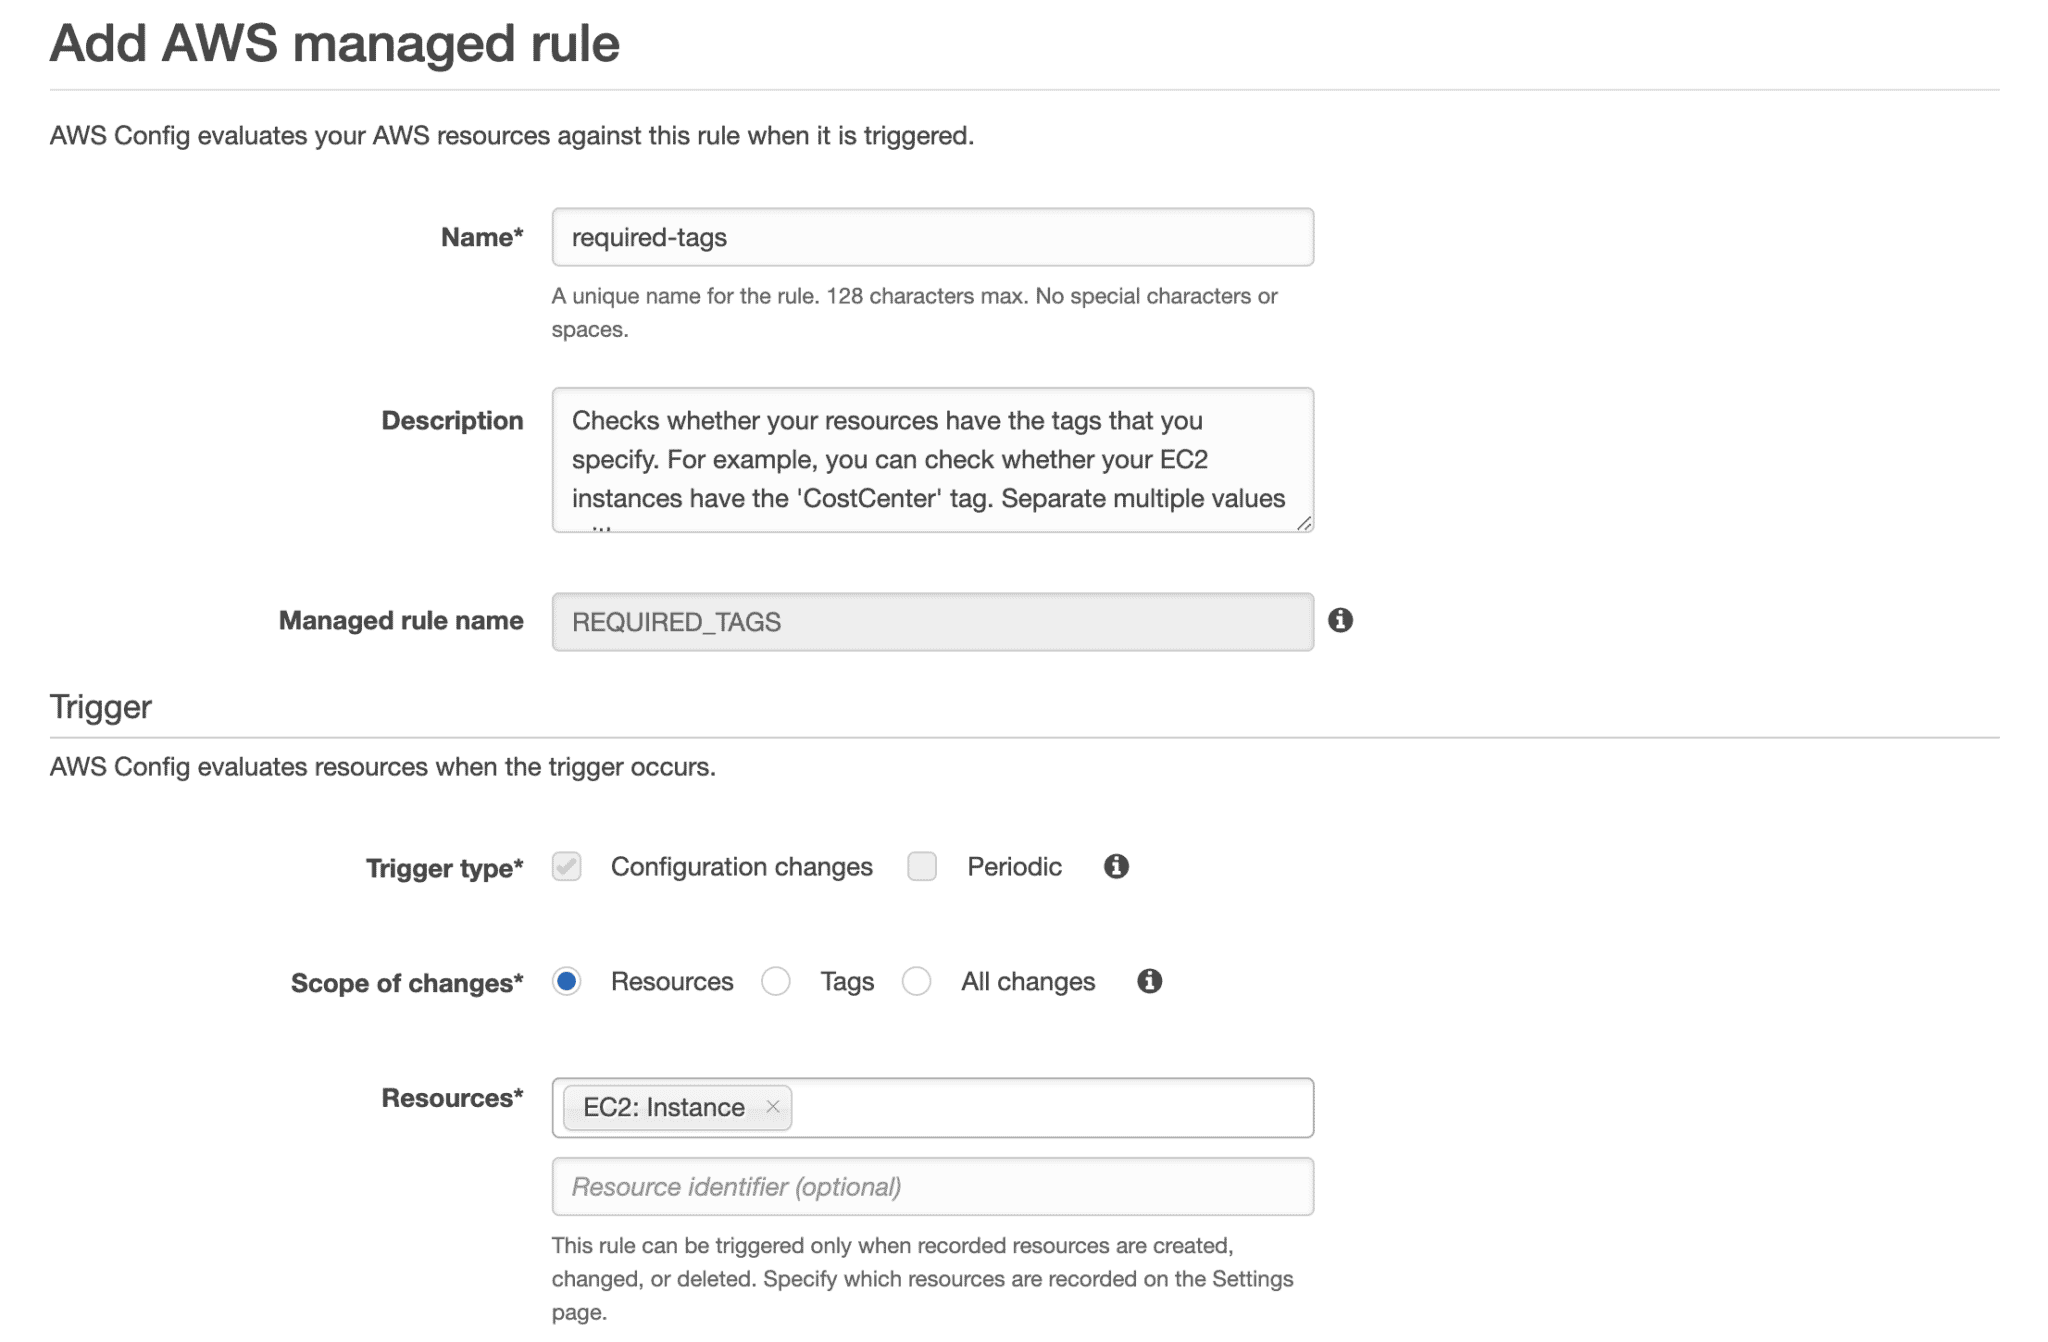 Creating an AWS Config Rule for required tags, step 2